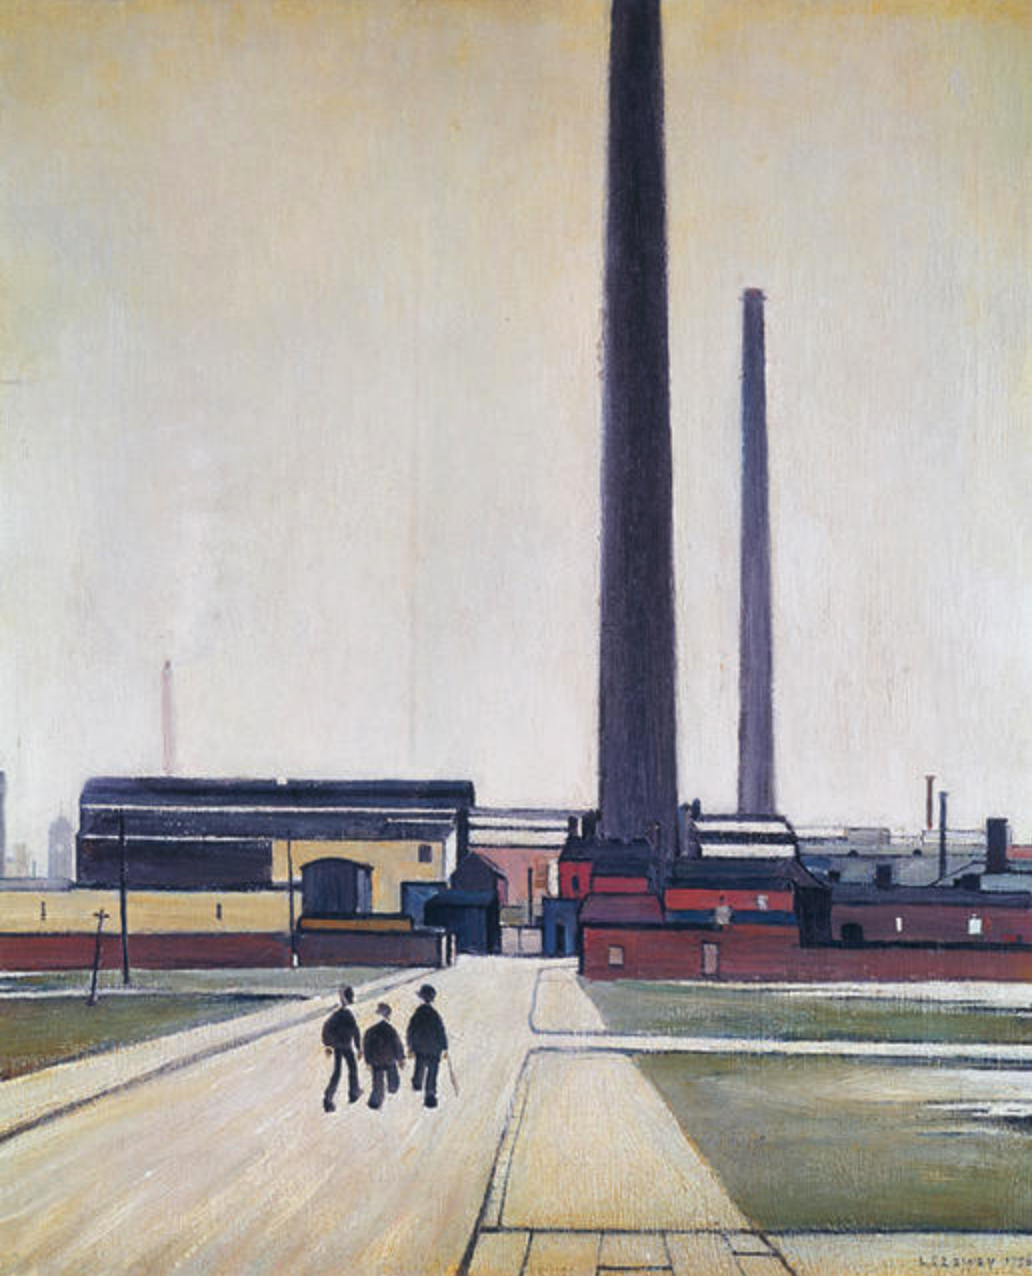 Factory at Widnes (1956) by Laurence Stephen Lowry (1887 - 1976), English artist.